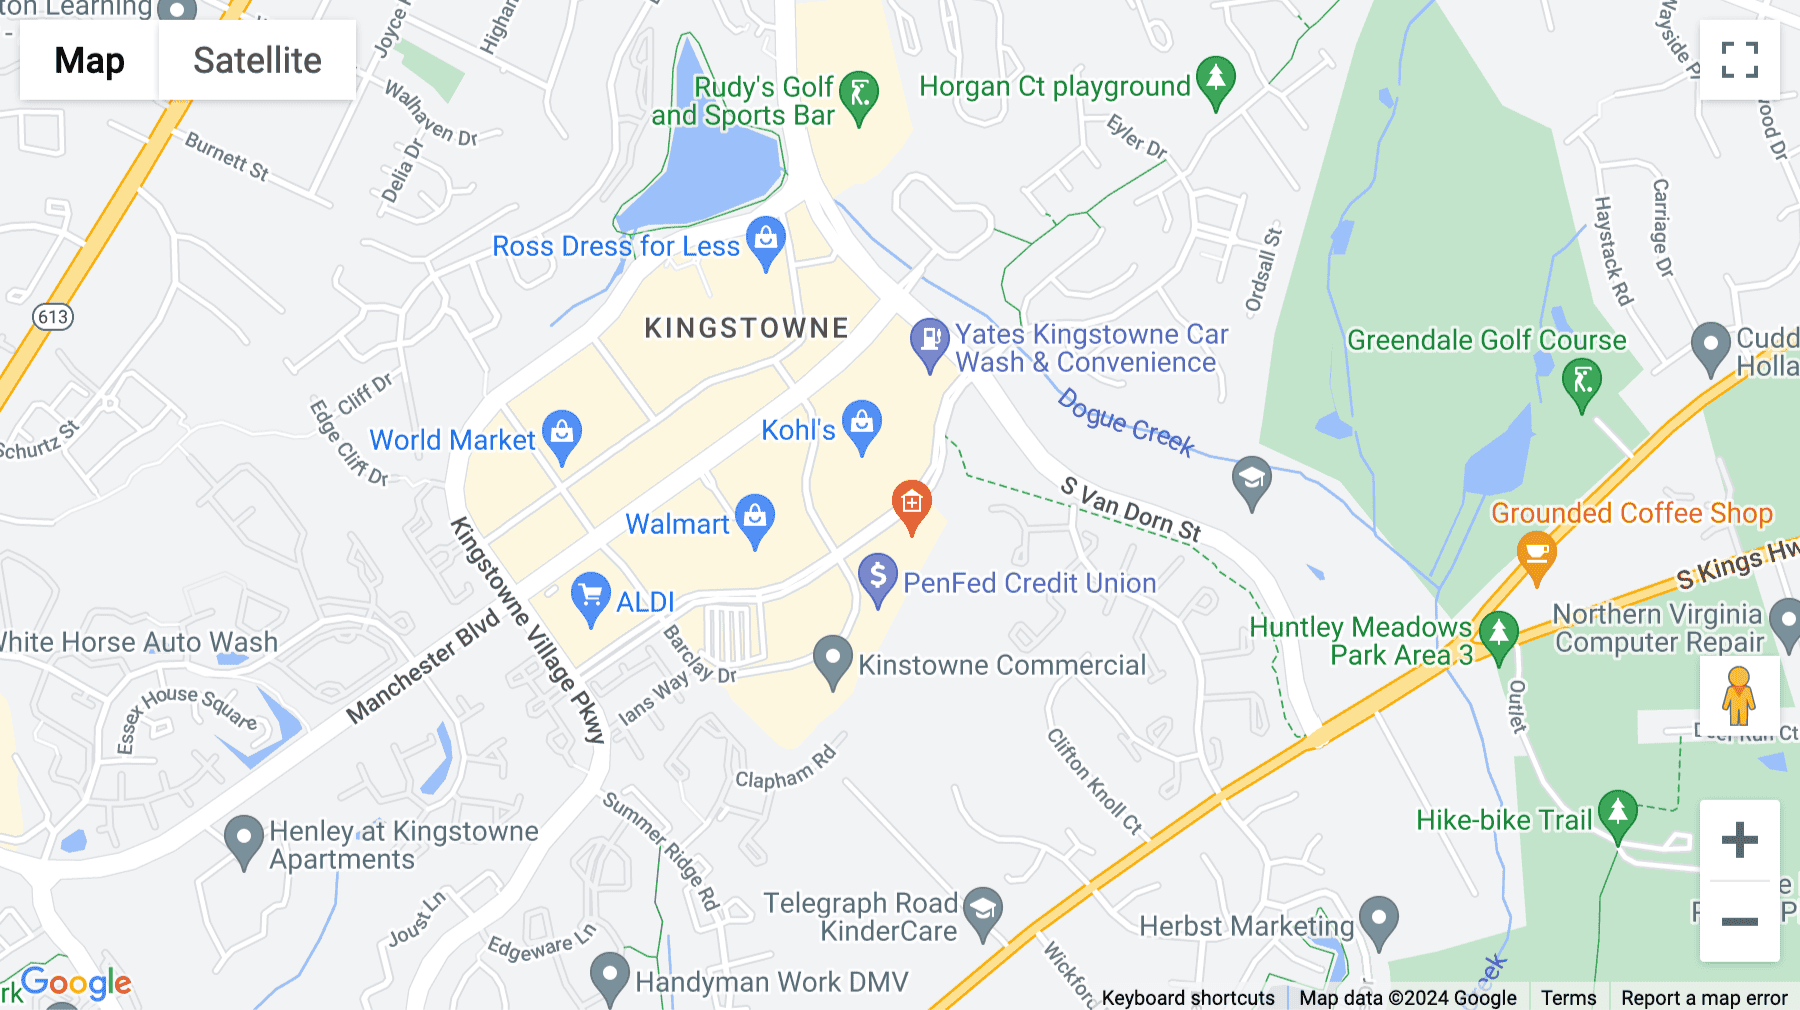 Click for interative map of 5680 King Centre Dr. Suite 600, Alexandria, Virginia, Kingstowne, Kingstowne